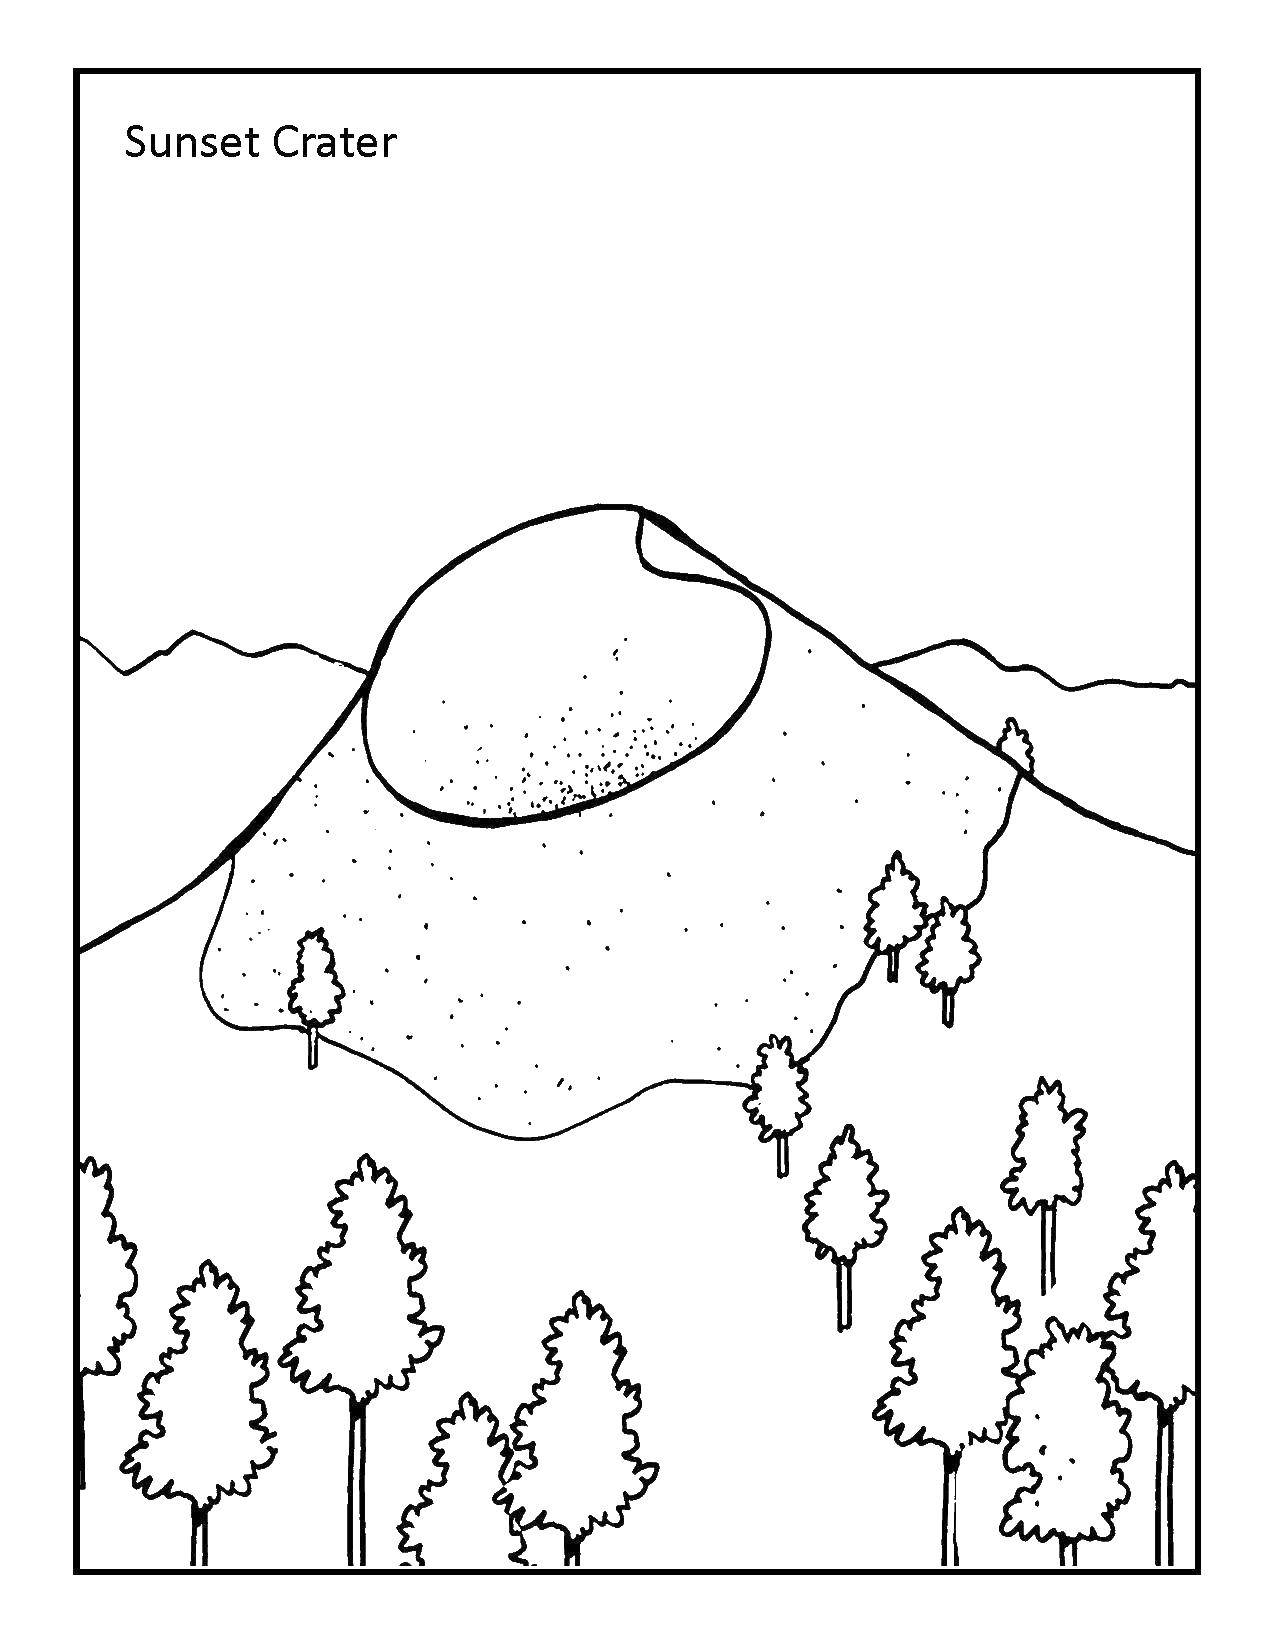 Coloring The crater of the volcano. Category Volcano. Tags:  volcano, crater.